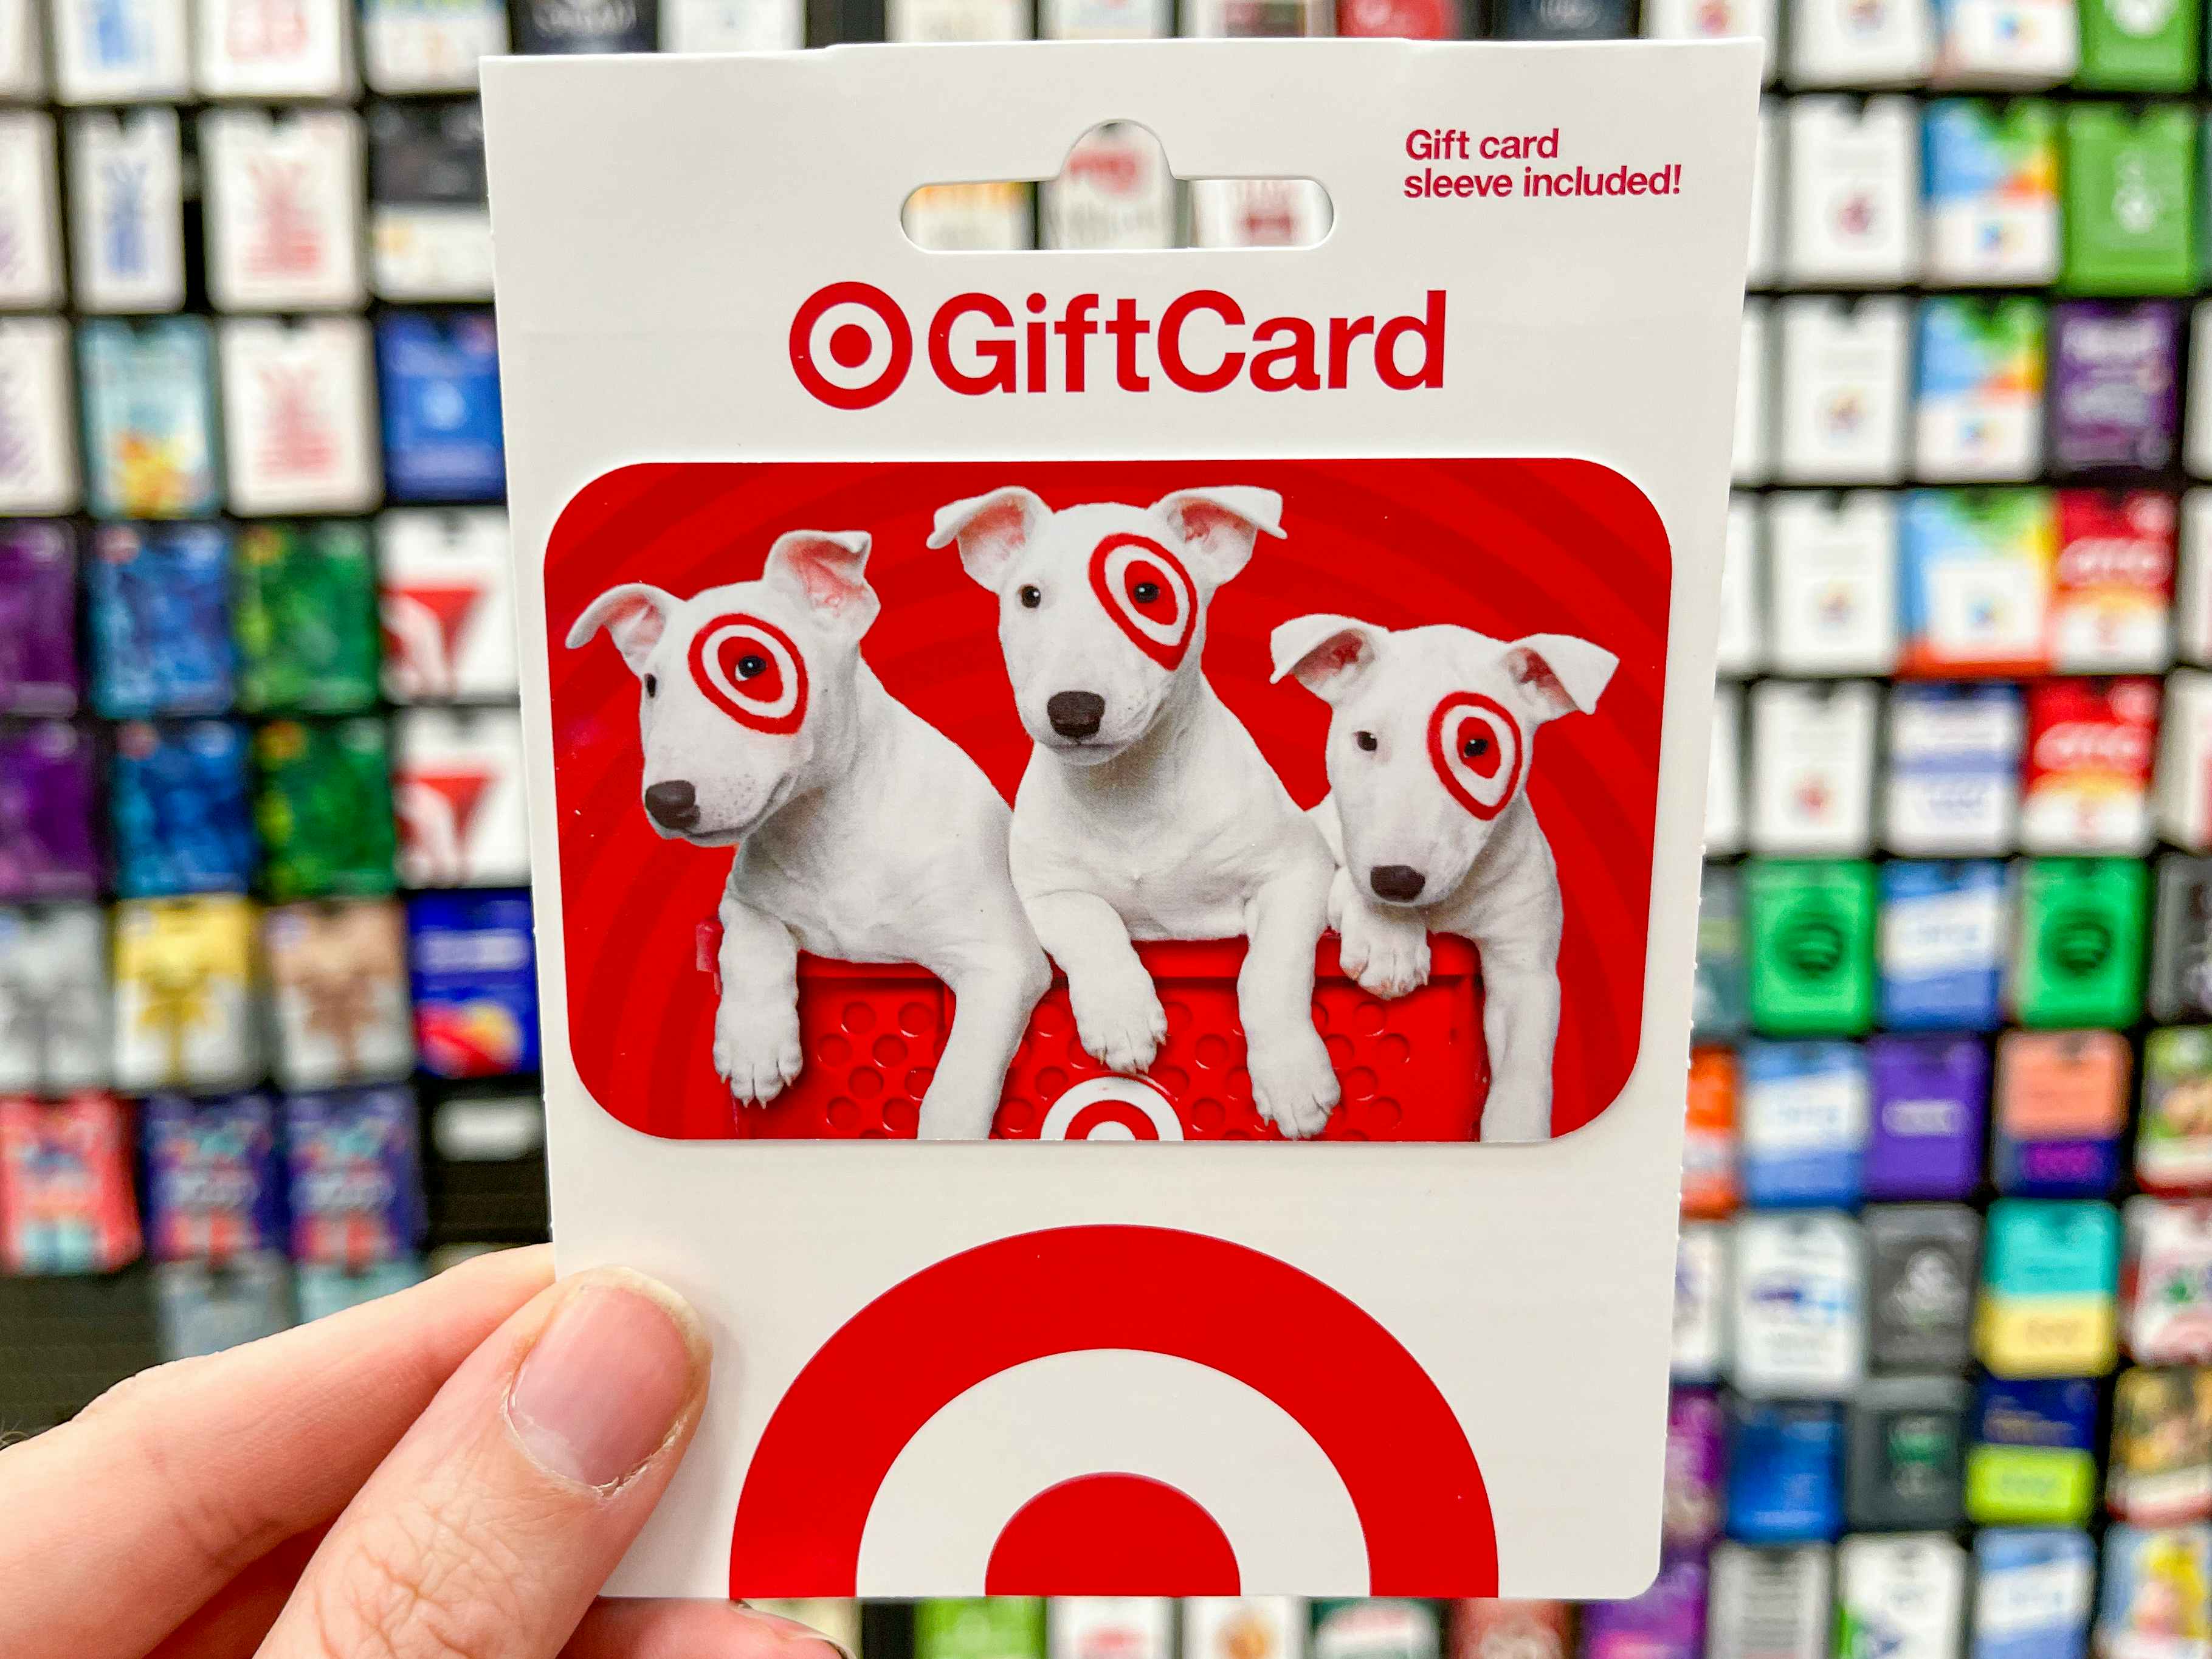 A Target gift card held in front of the wall of gift cards in Target